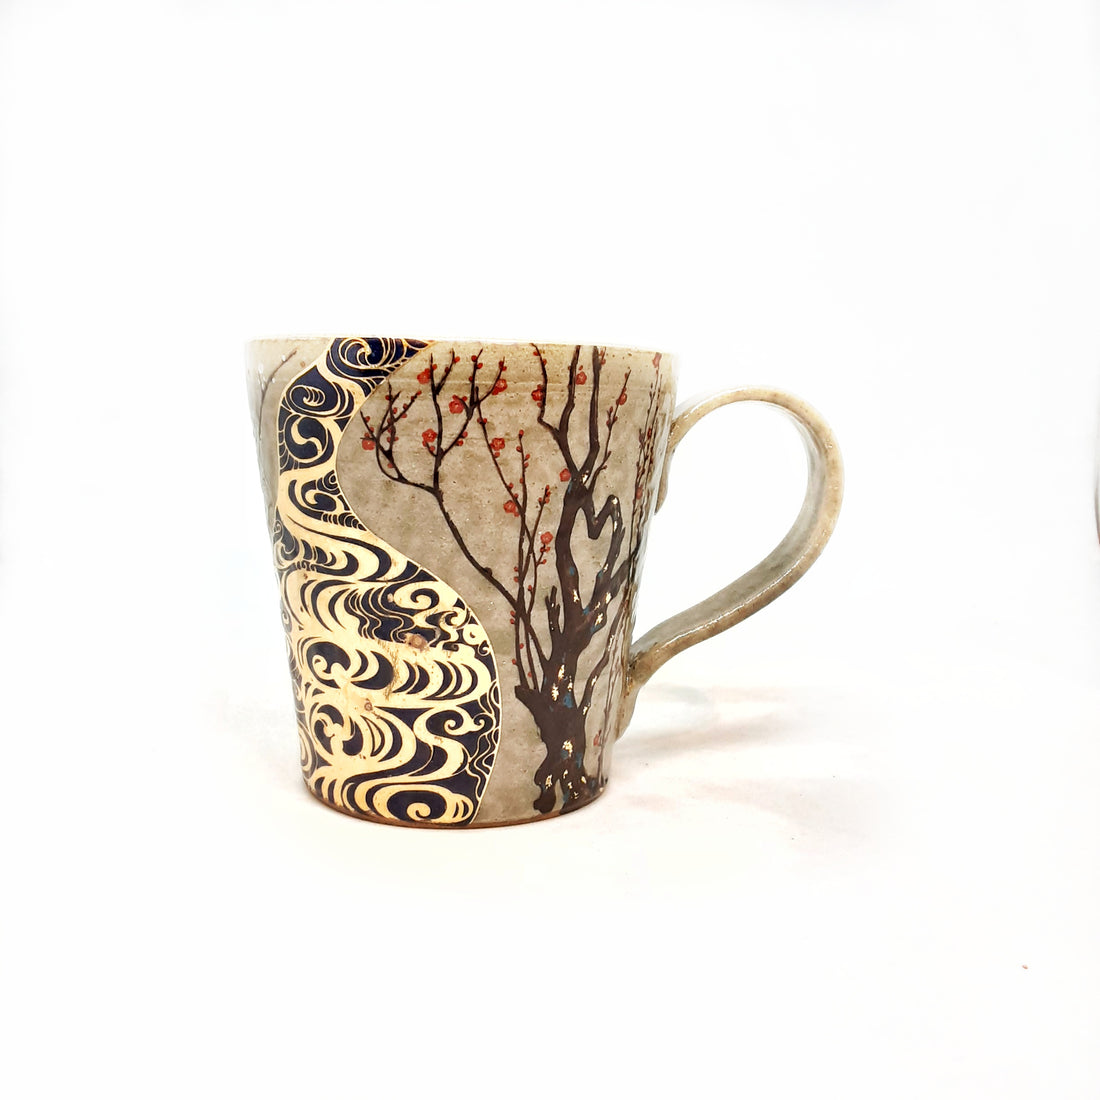 Japanese Tea Cup- Red and White Plum Blossoms Mug - 861